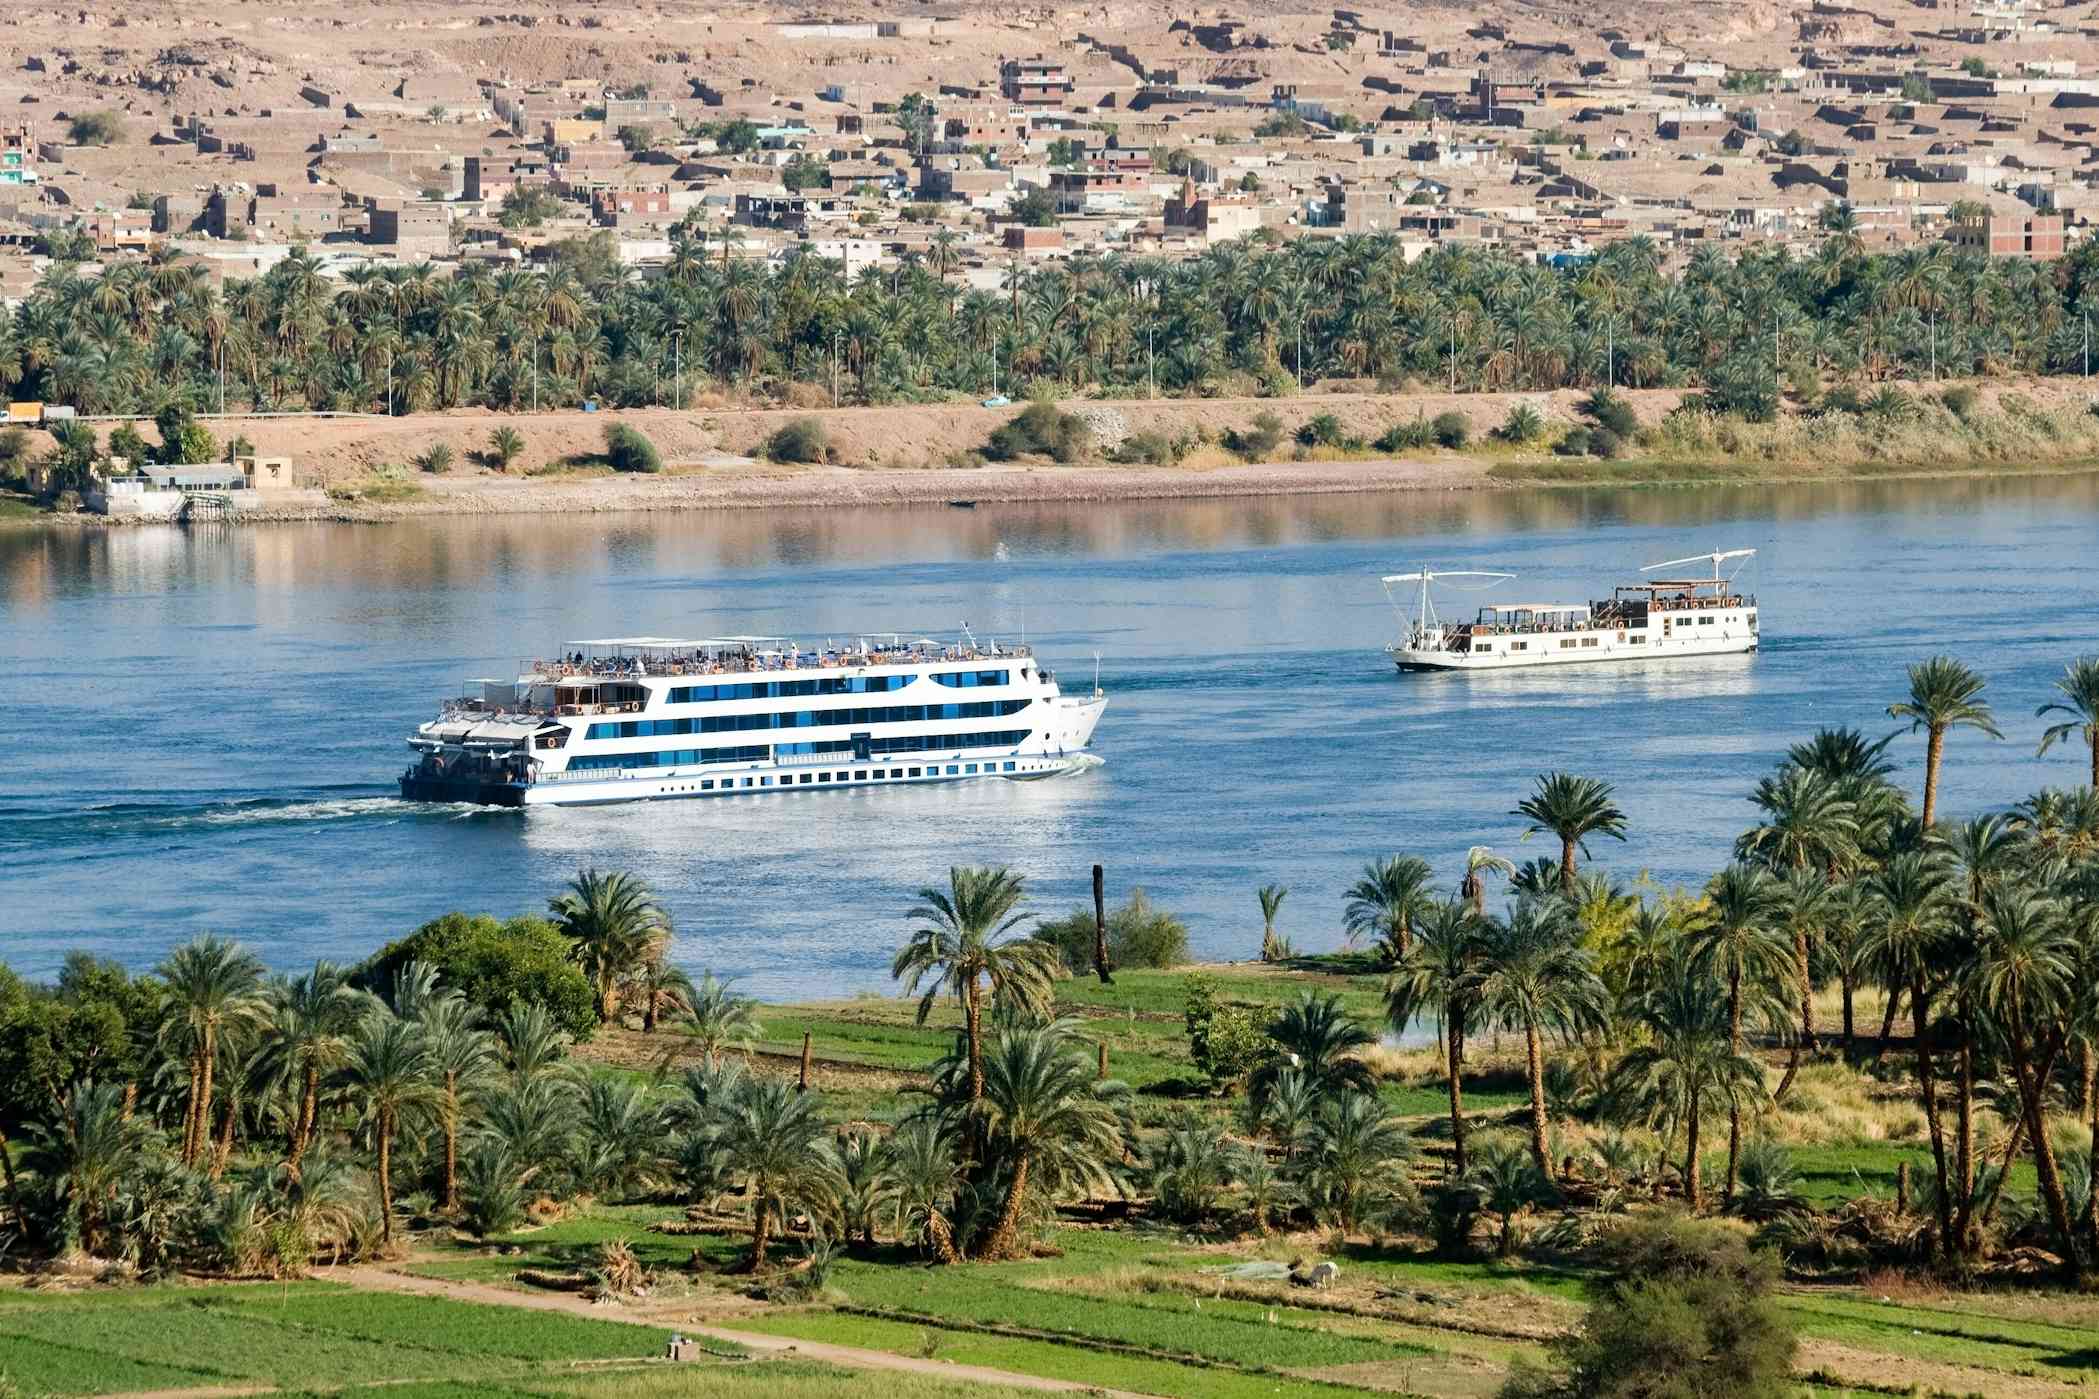 Is It Safe to Cruise the Nile River?